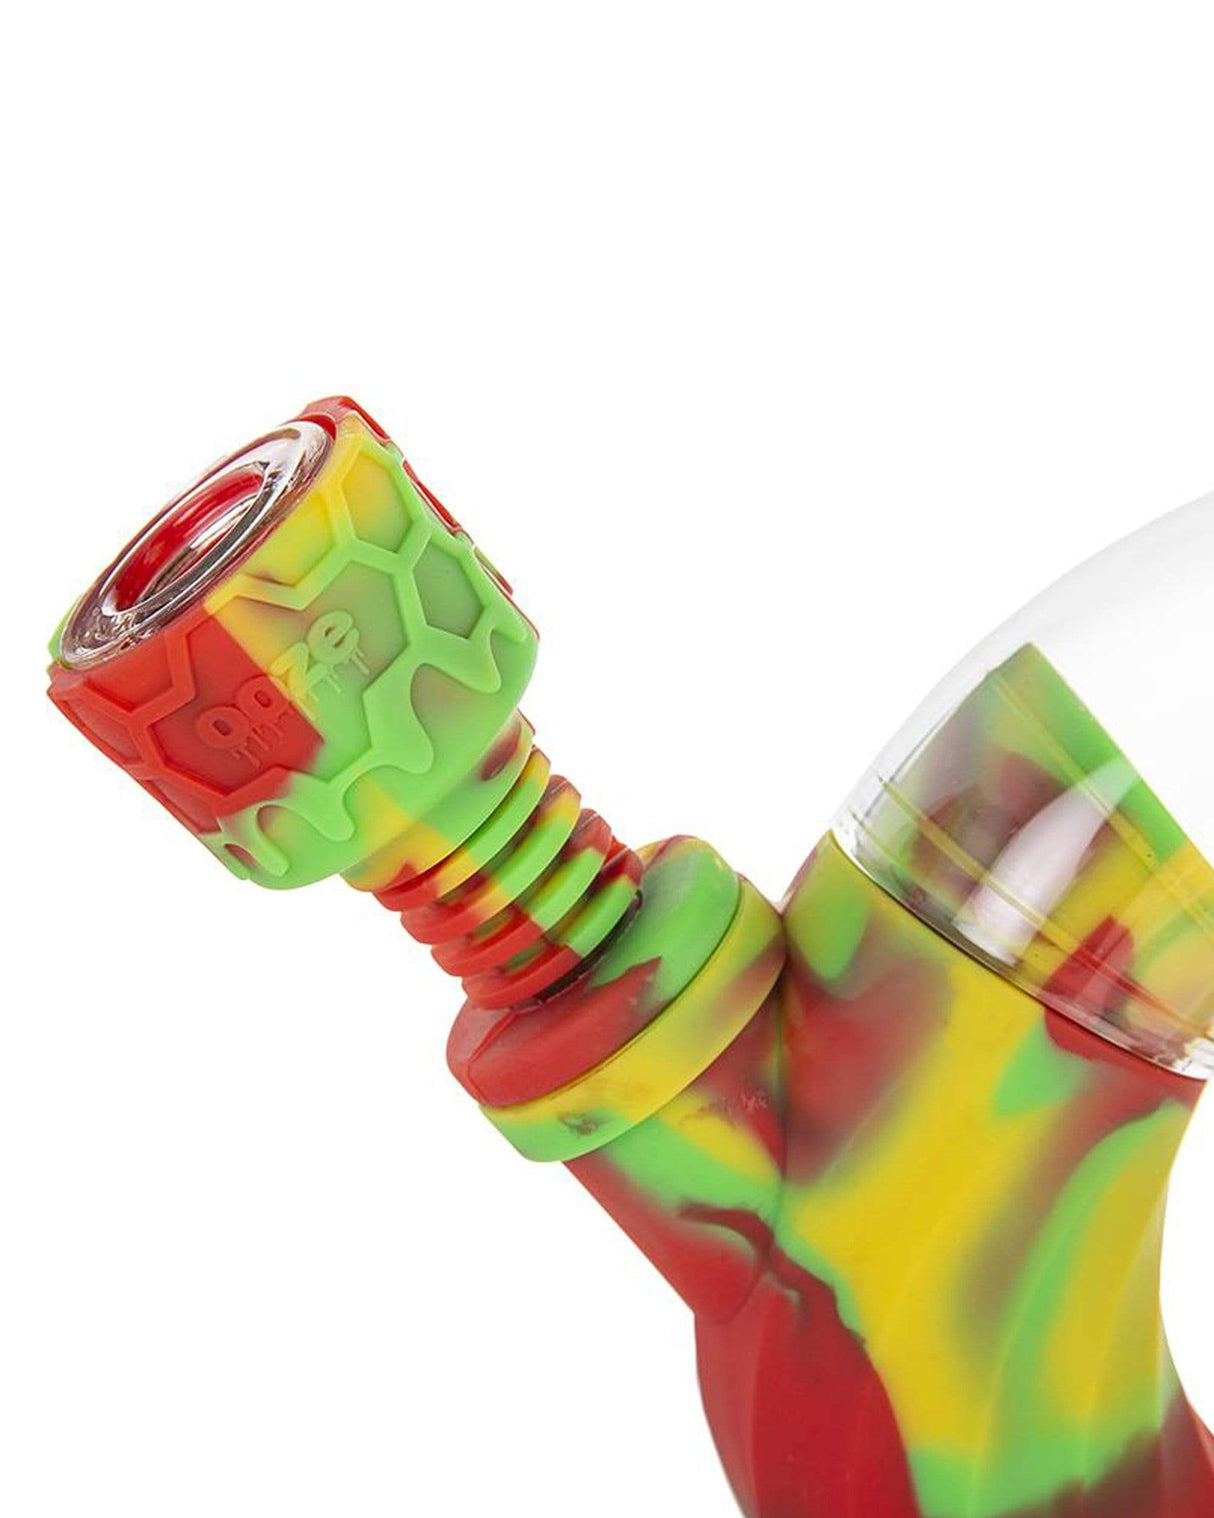 Ooze Ozone Silicone Bong close-up showing colorful design and borosilicate glass bowl